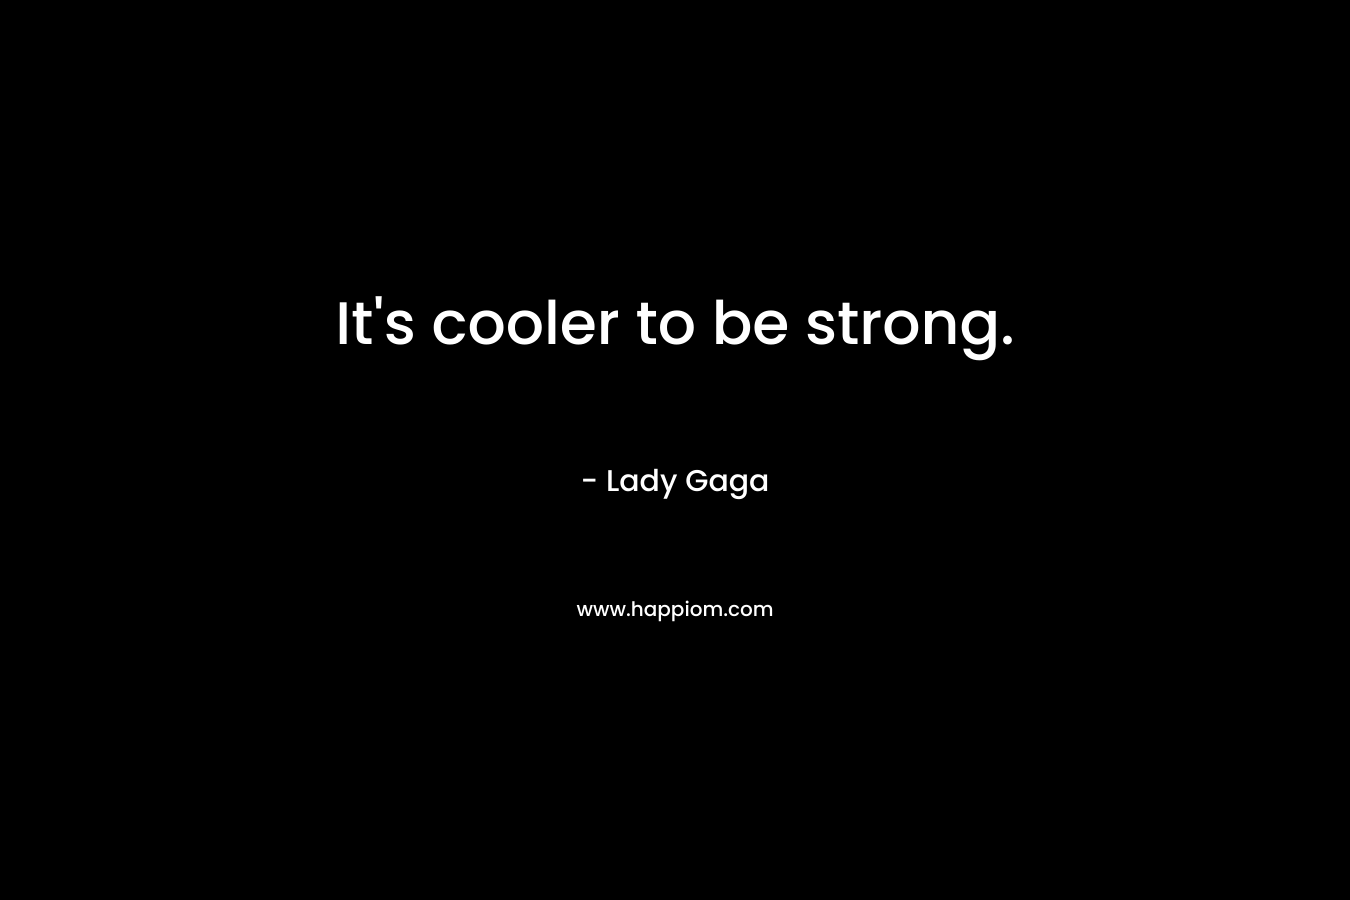 It’s cooler to be strong. – Lady Gaga